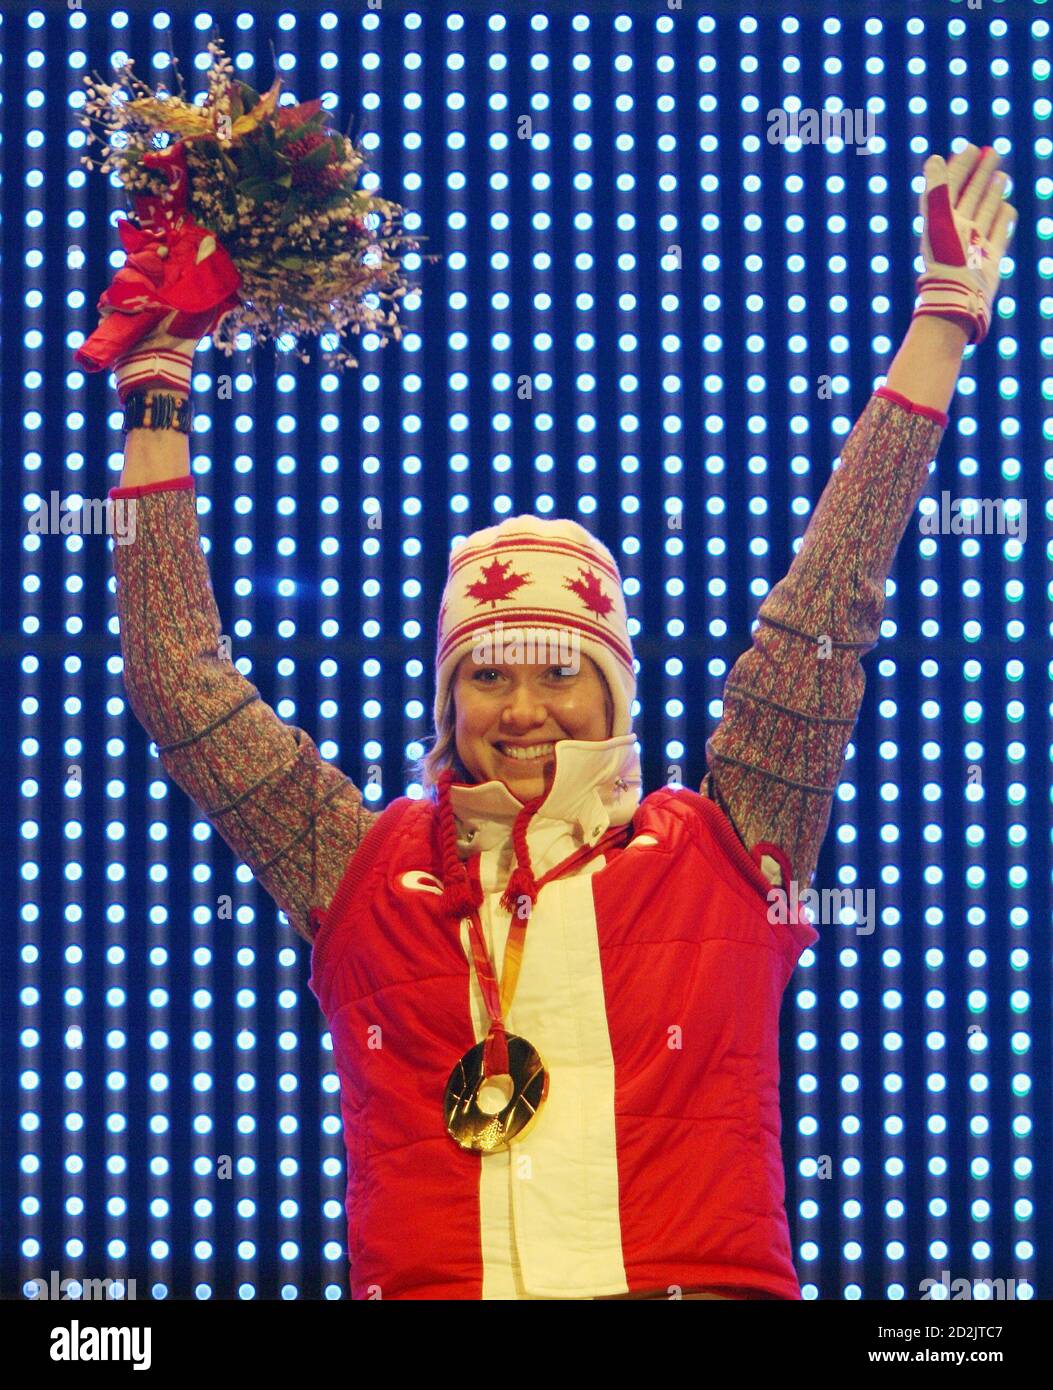 Canada's Cindy Klassen wears her gold medal, won in the women's 1500 metres speed skating event, at the Torino 2006 Winter Olympic Games in Turin, Italy, February 23, 2006. Stock Photo